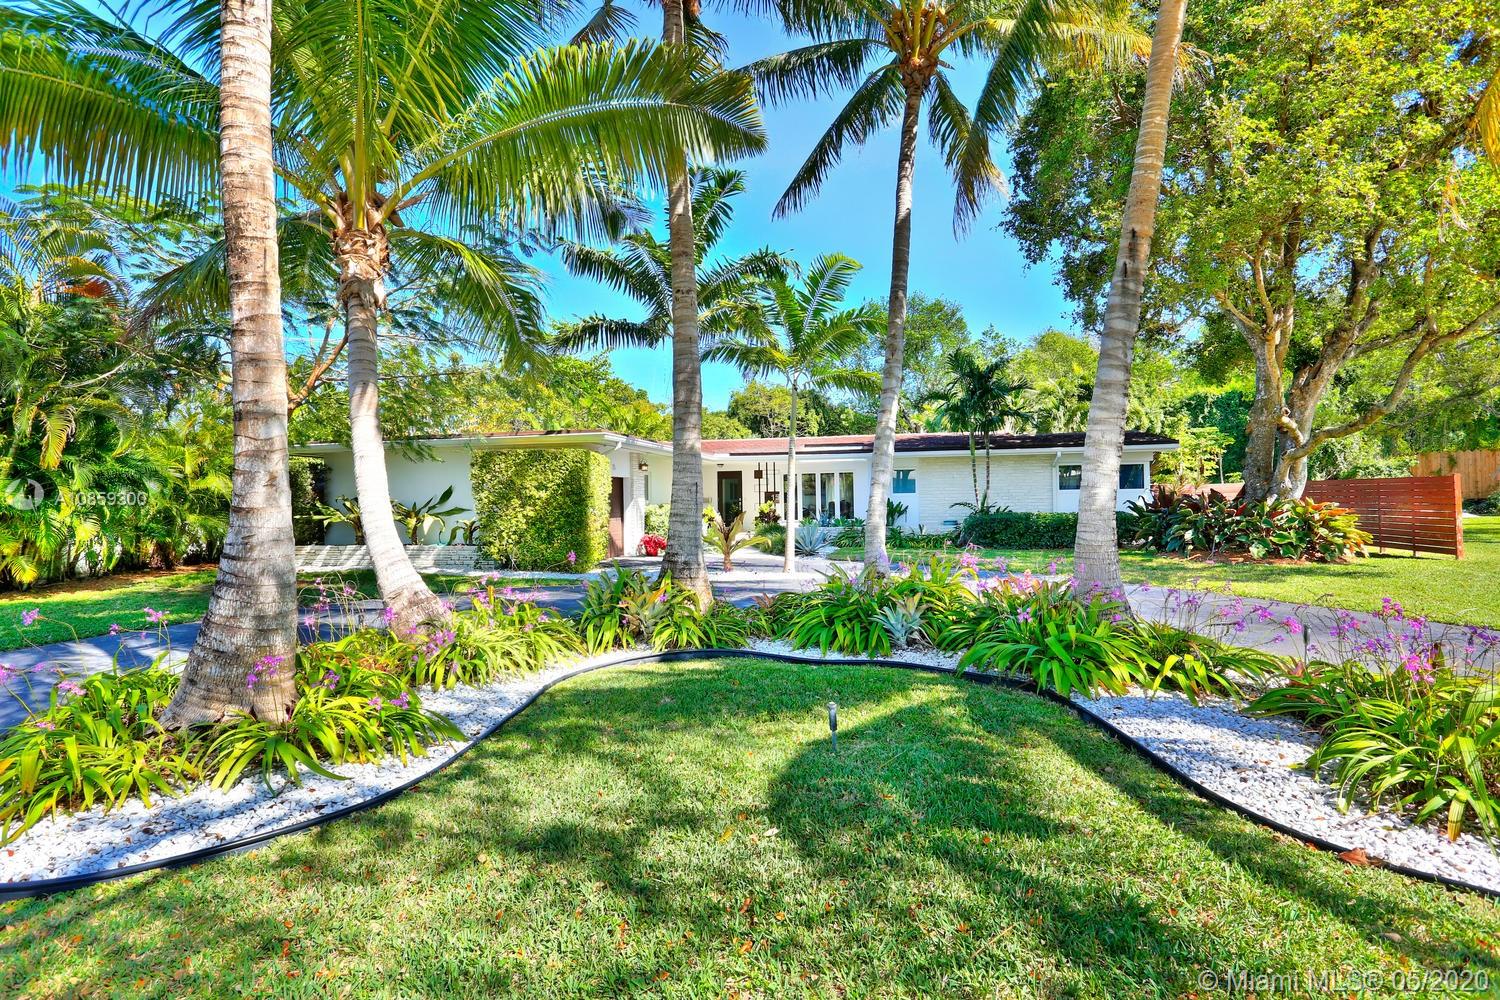 Stunning home, surrounded by close to a half-acre of lush tropical gardens in prestigious North Coconut Grove. Light-filled formal living, dining & family rooms w/walls of glass overlooking the ultra-private, resort-style pool & terrace. Major renovation in 2015, including porcelain tile & wood flooring, custom built-ins & impact glass throughout. A spectacular open kitchen features sleek euro-style wood cabinetry, stone countertops, gas range, high-end appliances, island w/seating + breakfast area. 4BR/4BA + housekeeper&#x2019;s room. Expansive master suite includes his & hers custom walk-in closets & spa-like bath w/soaking tub & frameless glass shower. 24/7 security patrol. 16&#x2019; above sea-level. Close to the Grove village&#x2019;s bayfront parks & marinas and minutes to downtown, MIA & the Beaches.